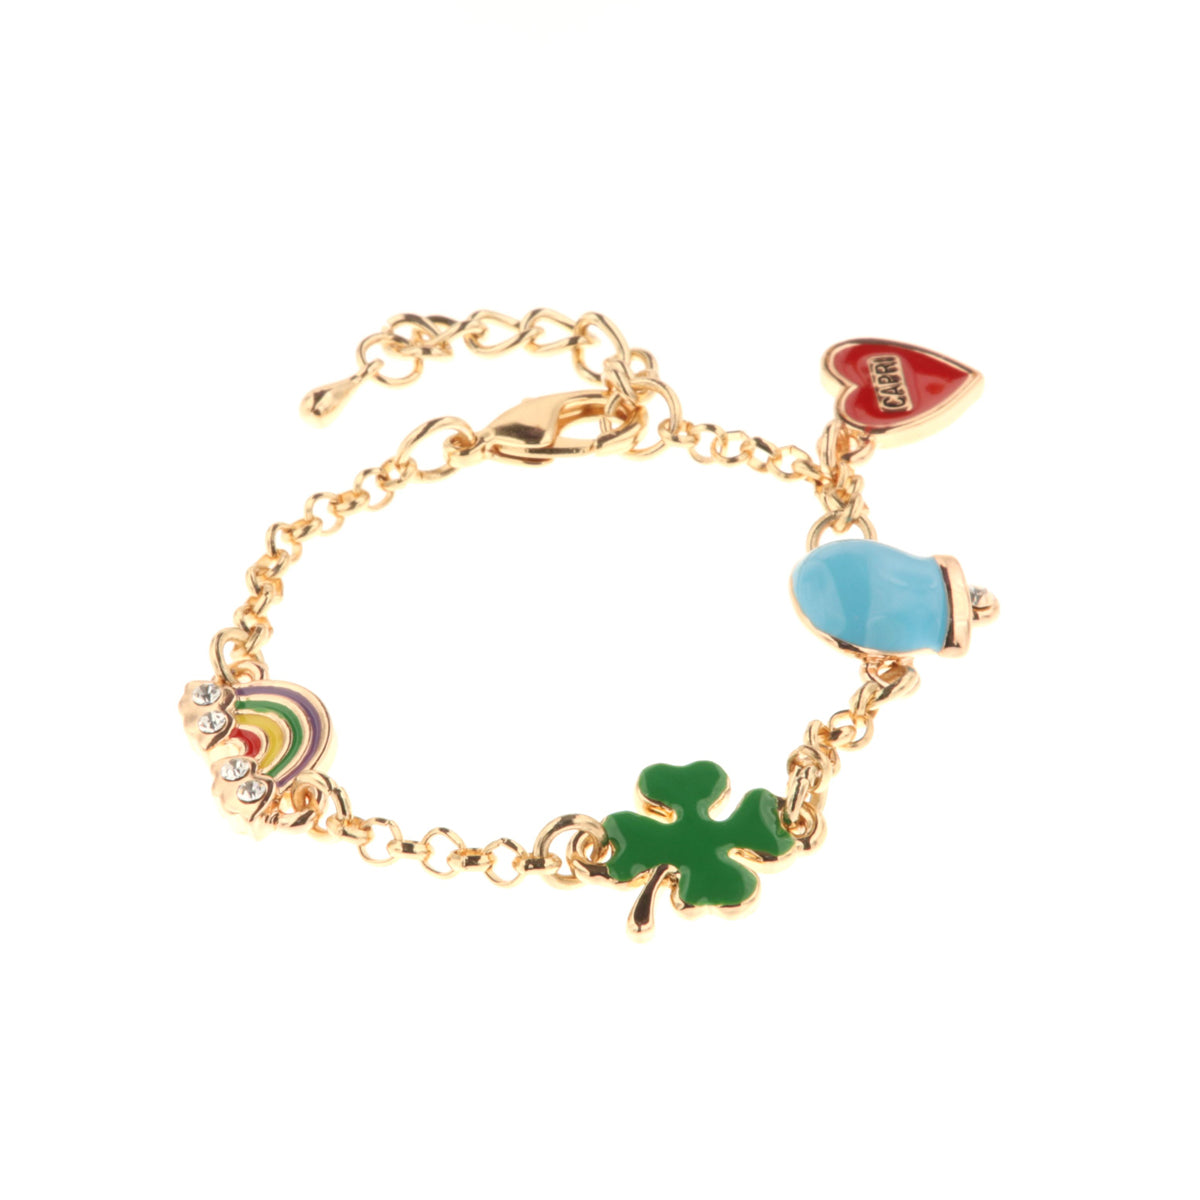 Metal bracelet with four -leaf clover, charming bell, heart with Capri and rainbow